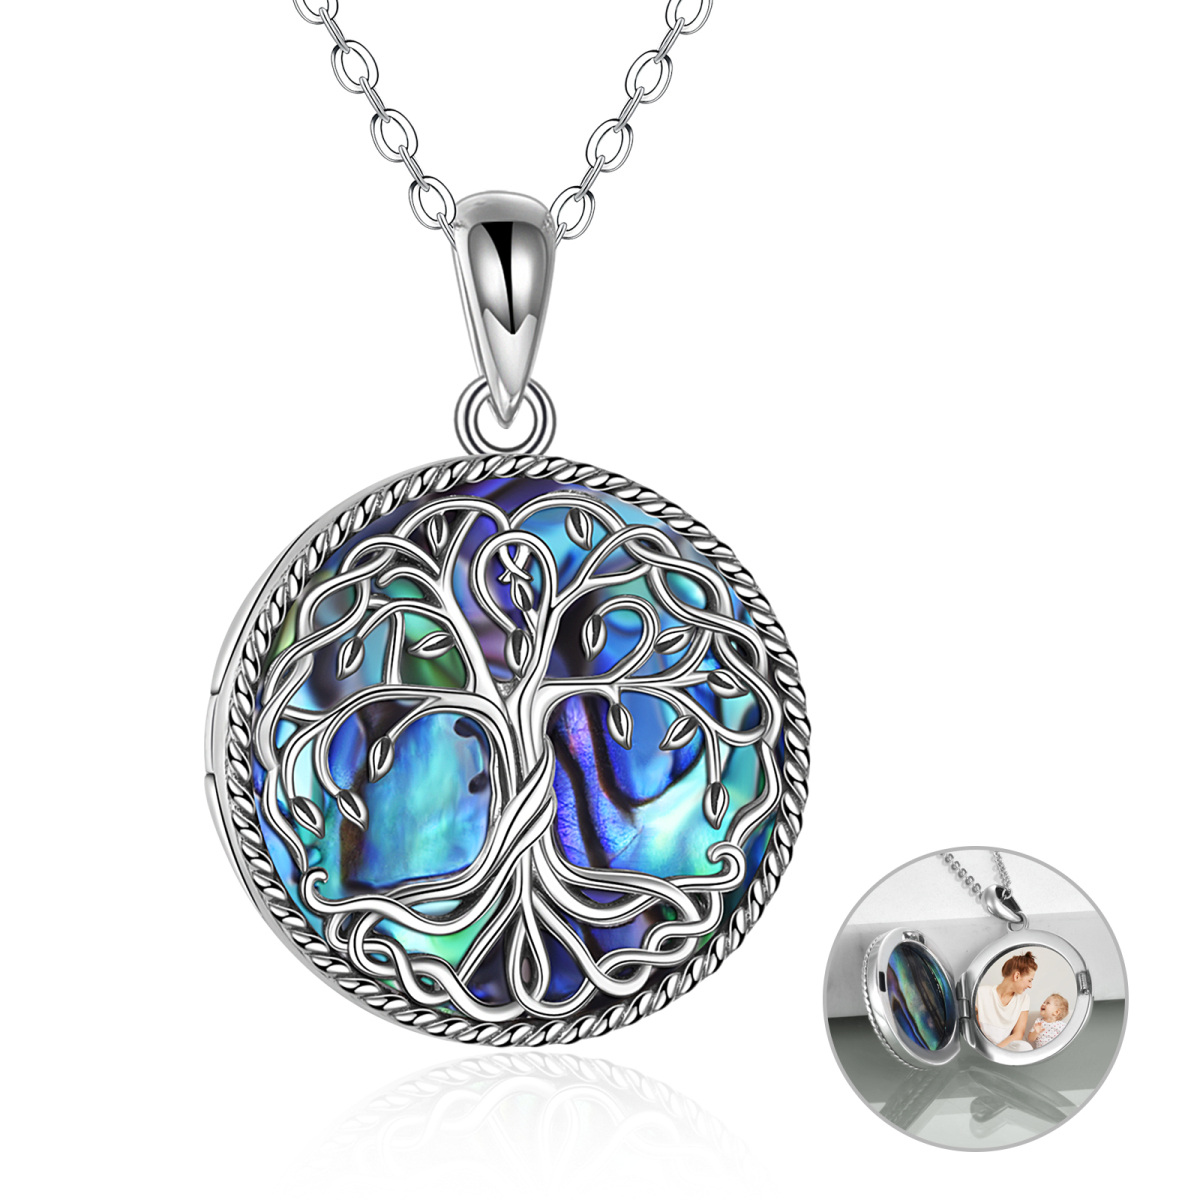 Sterling Silver Abalone Shellfish Tree Of Life Personalized Photo Locket Necklace with Engraved Word-1